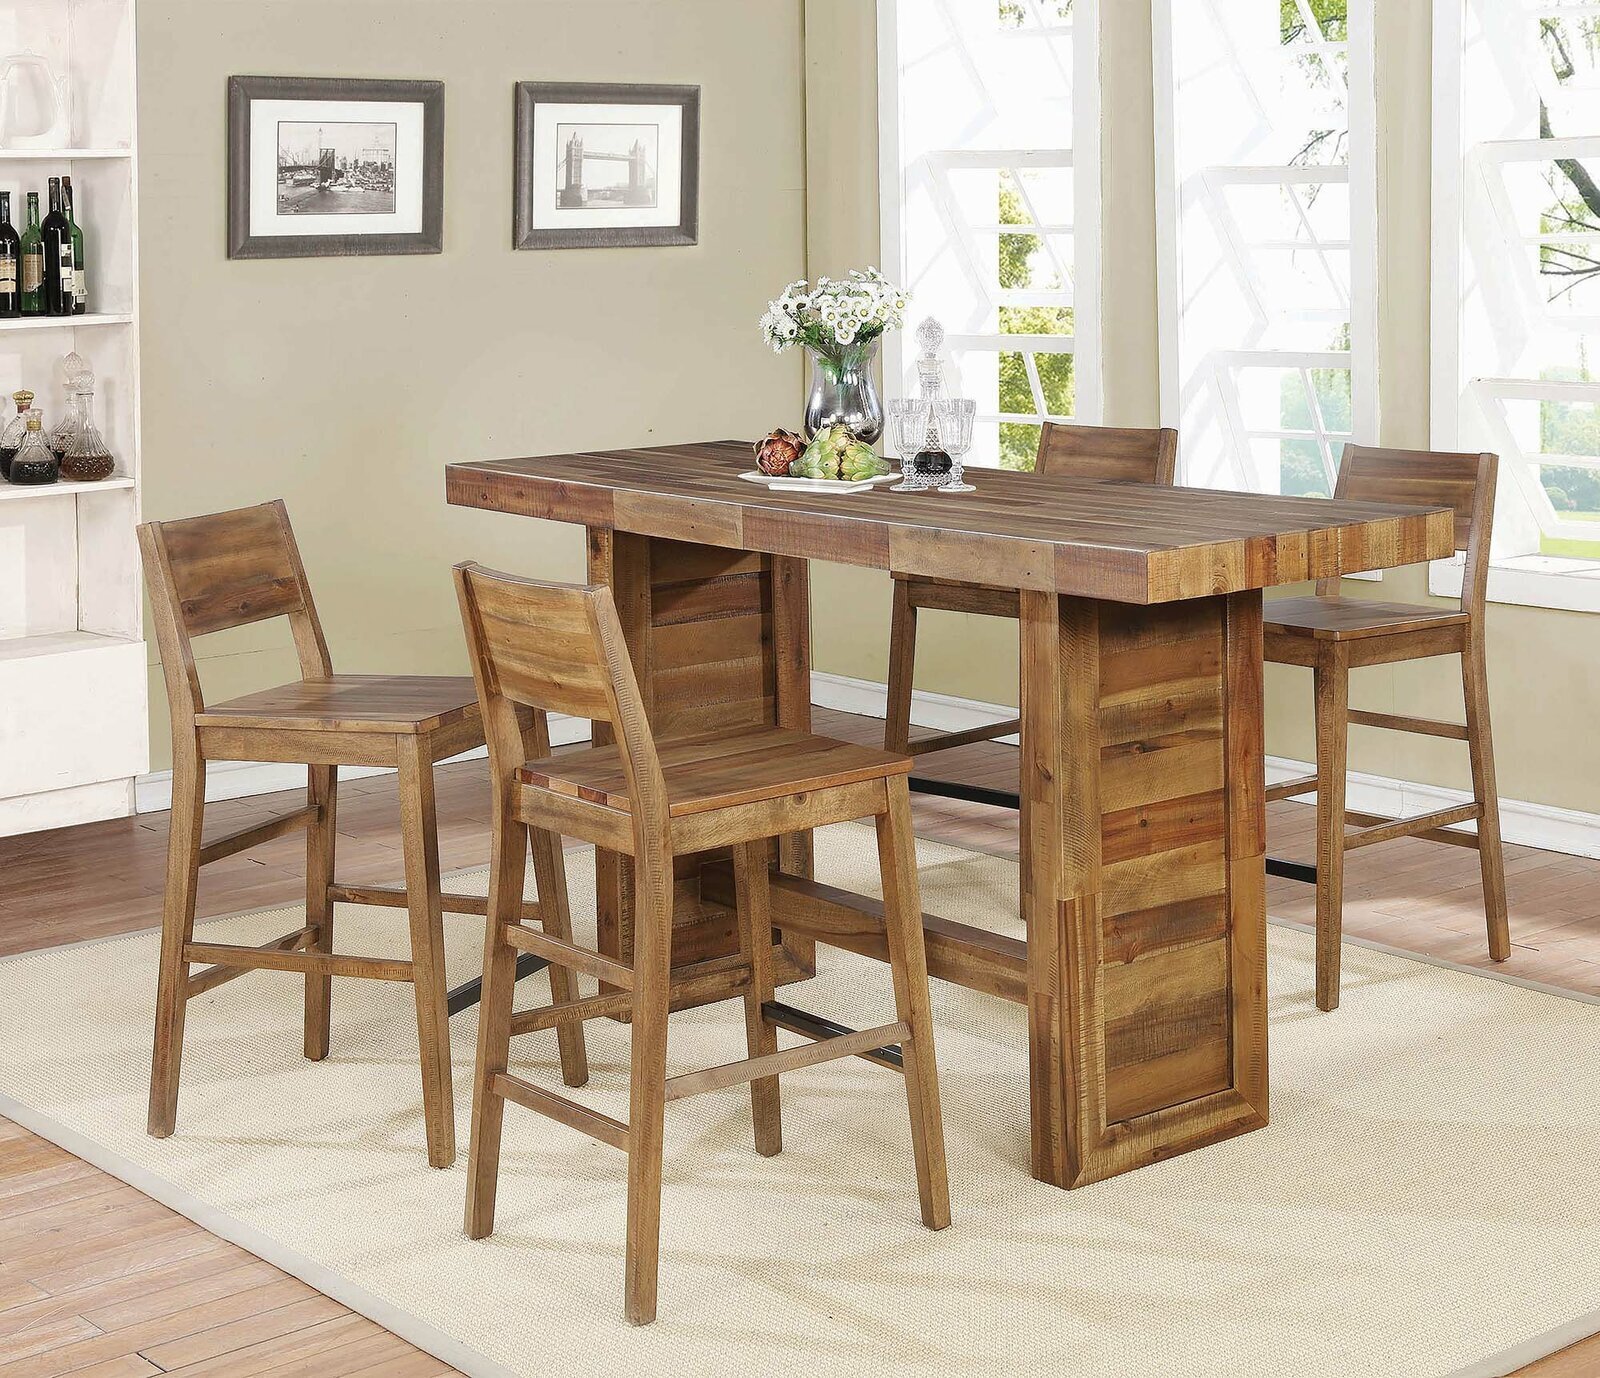 Wood High Top Table with Chairs